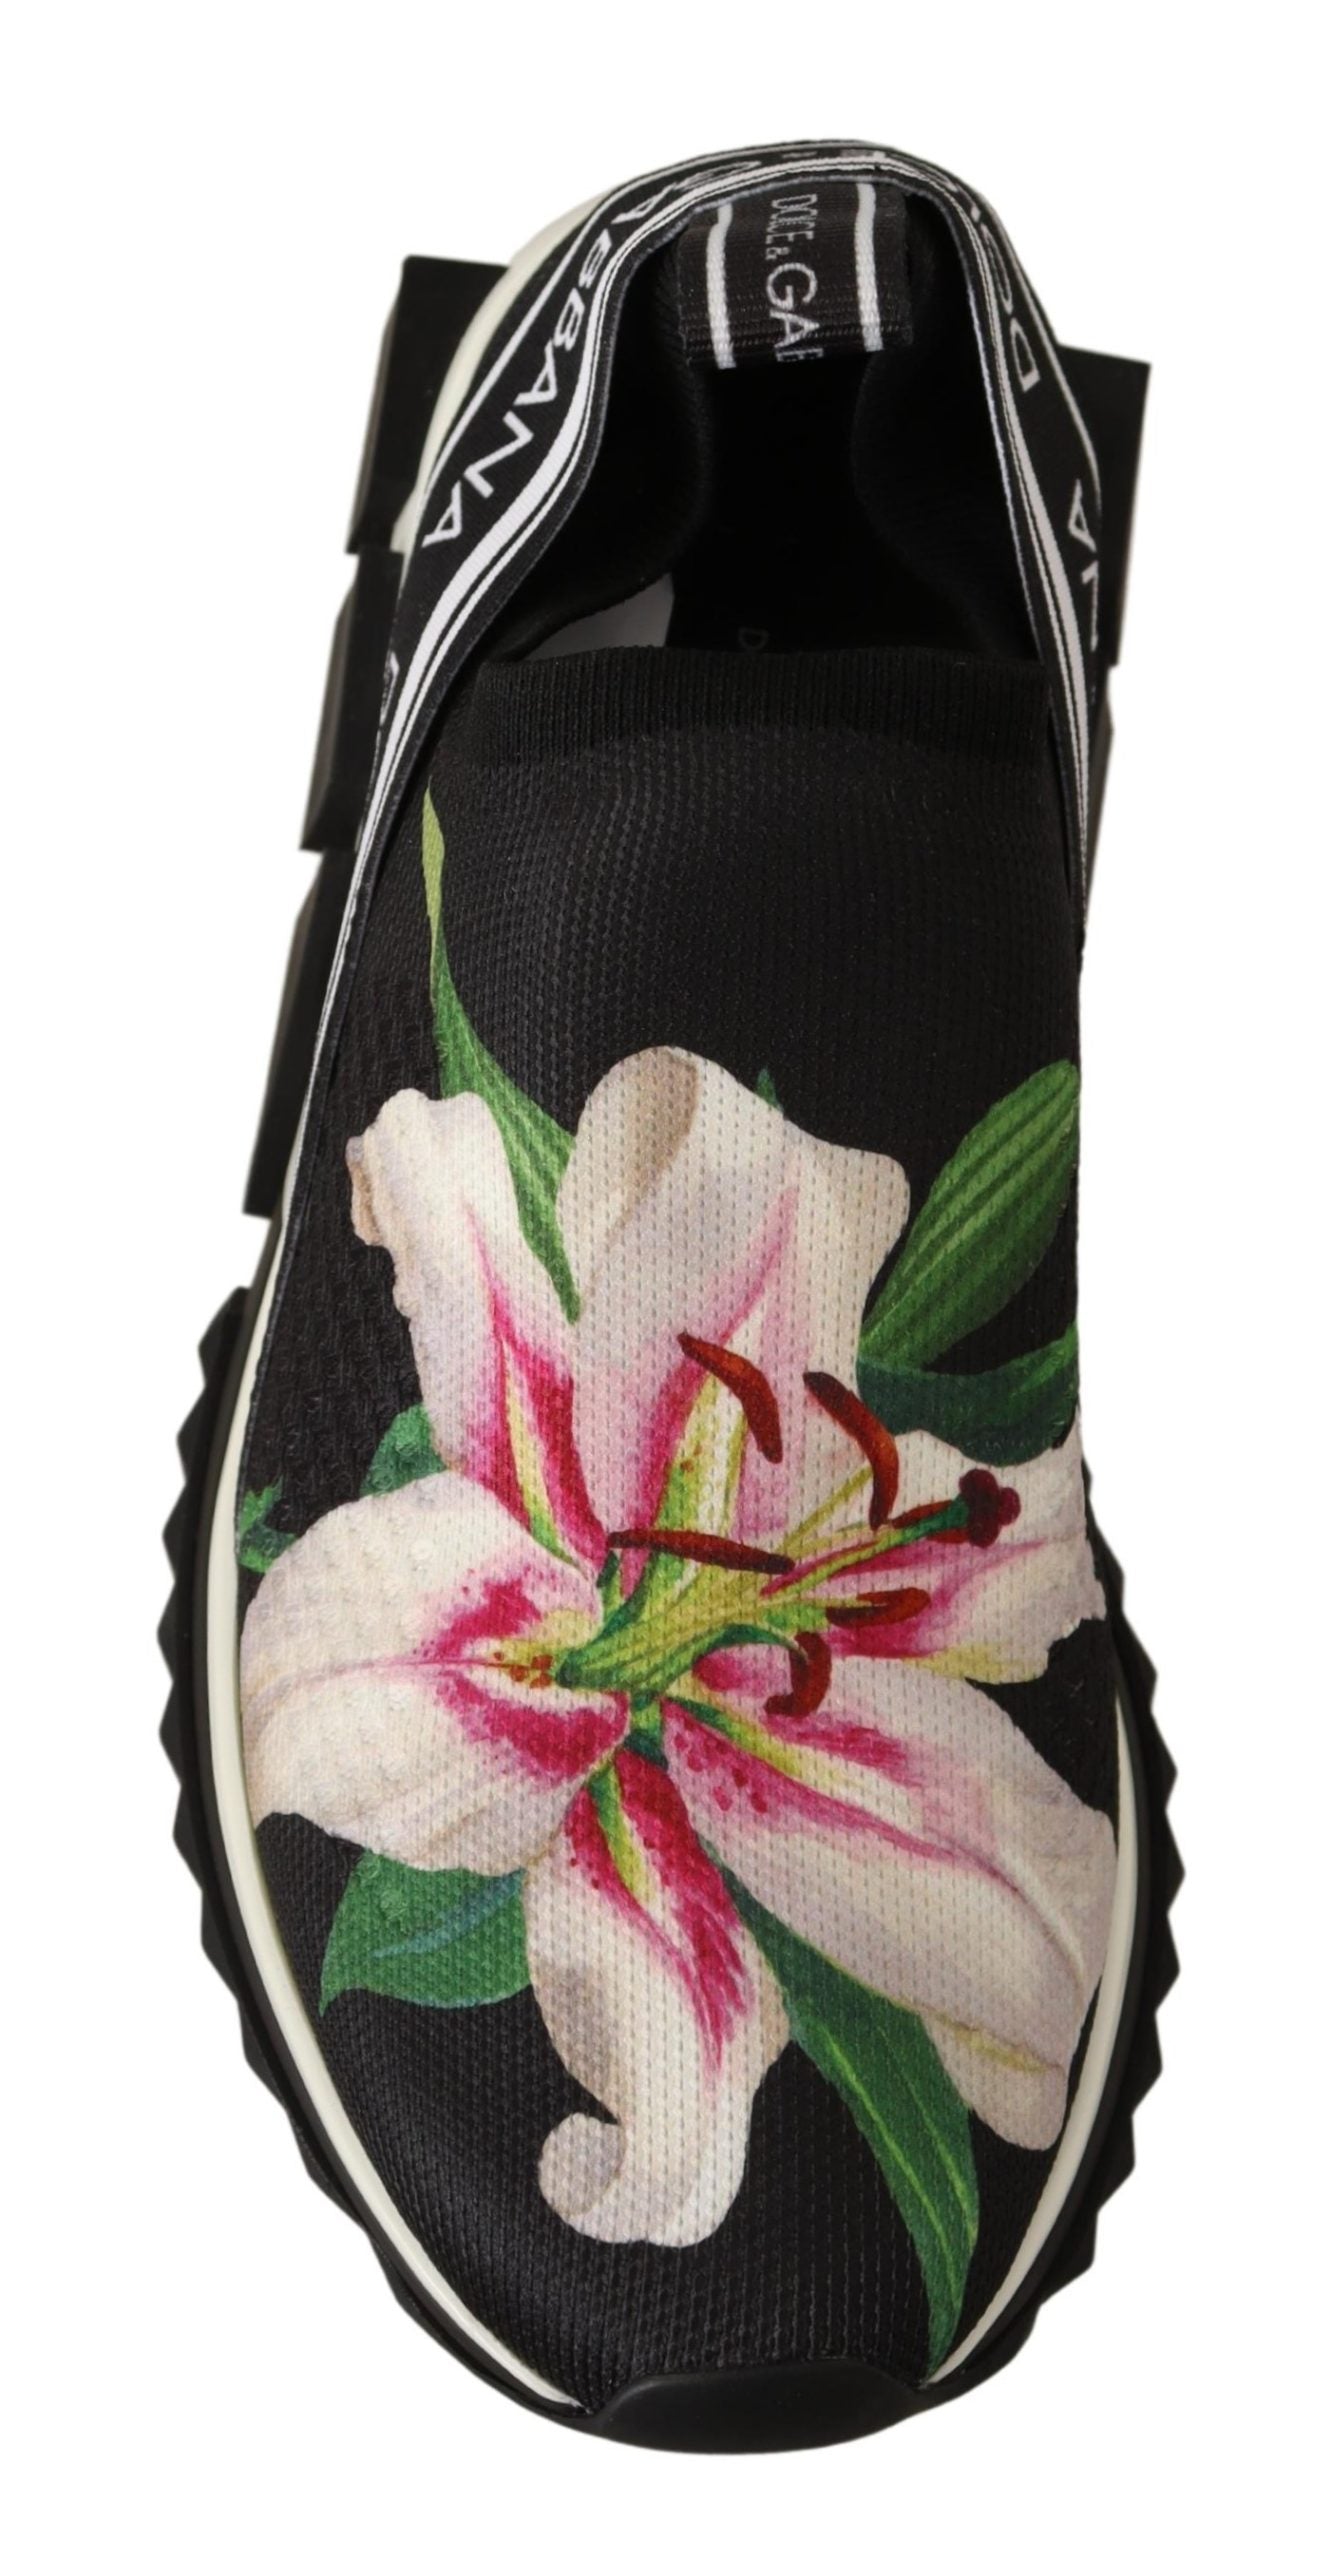 Black Floral Sorrento Low Top Sneakers Shoes